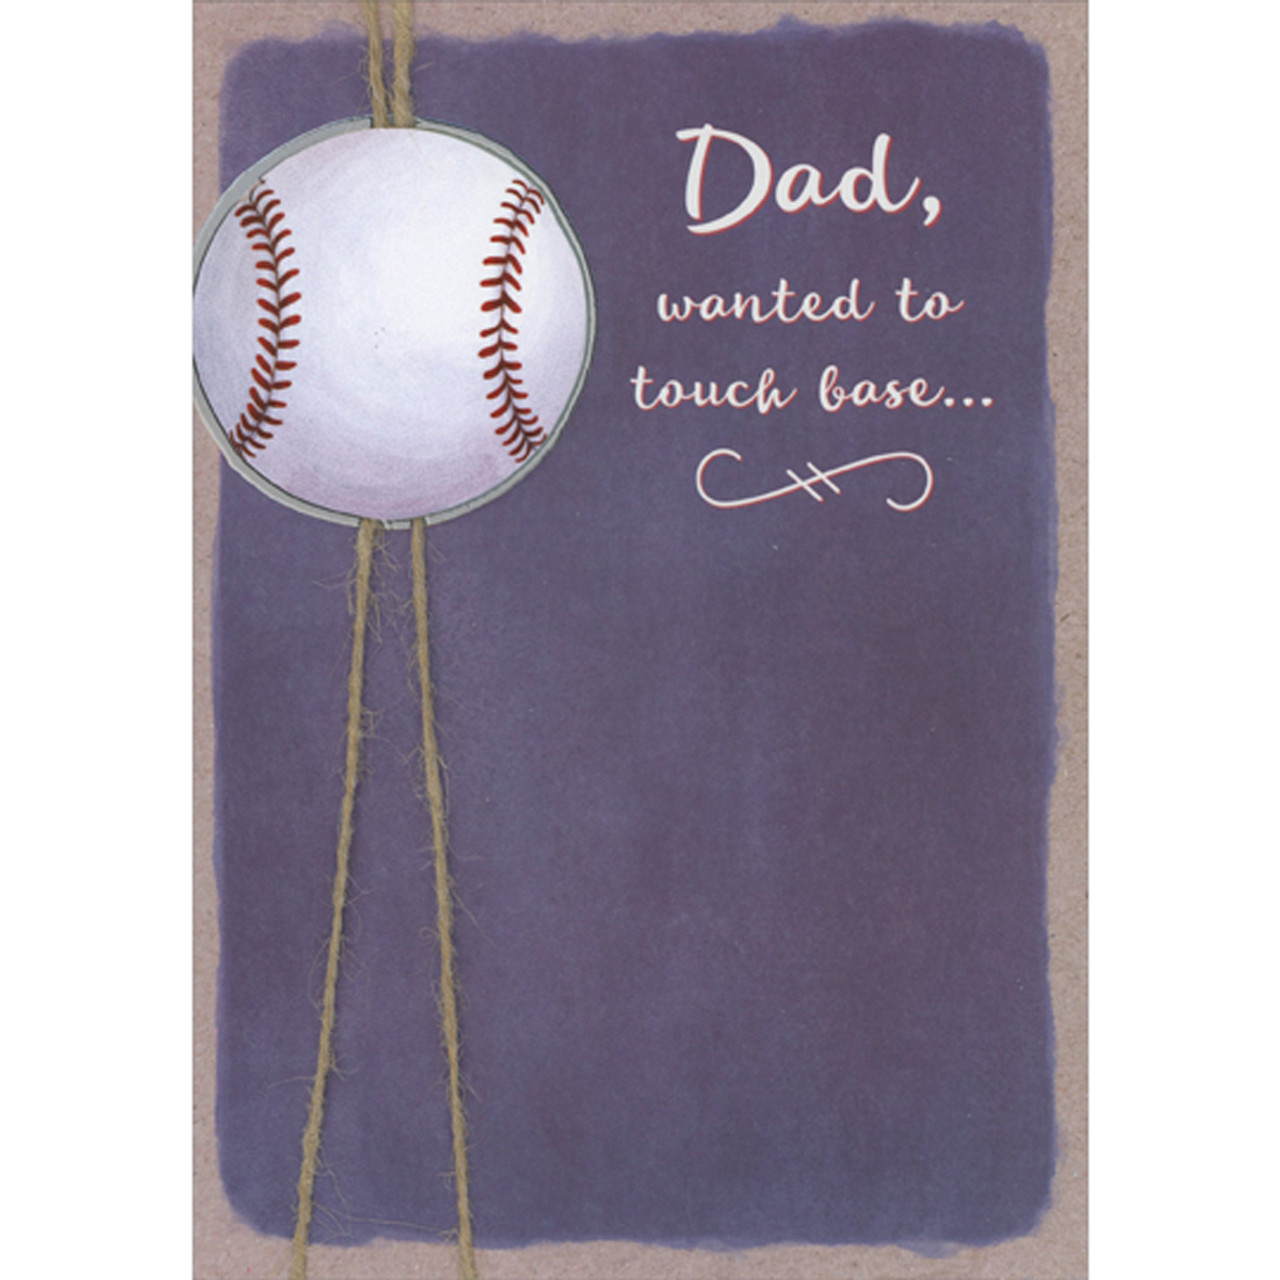 Dad, Wanted to Touch Base: 3D Die Cut Baseball Over Brown String on Purple  Hand Decorated Father's Day Card from Son